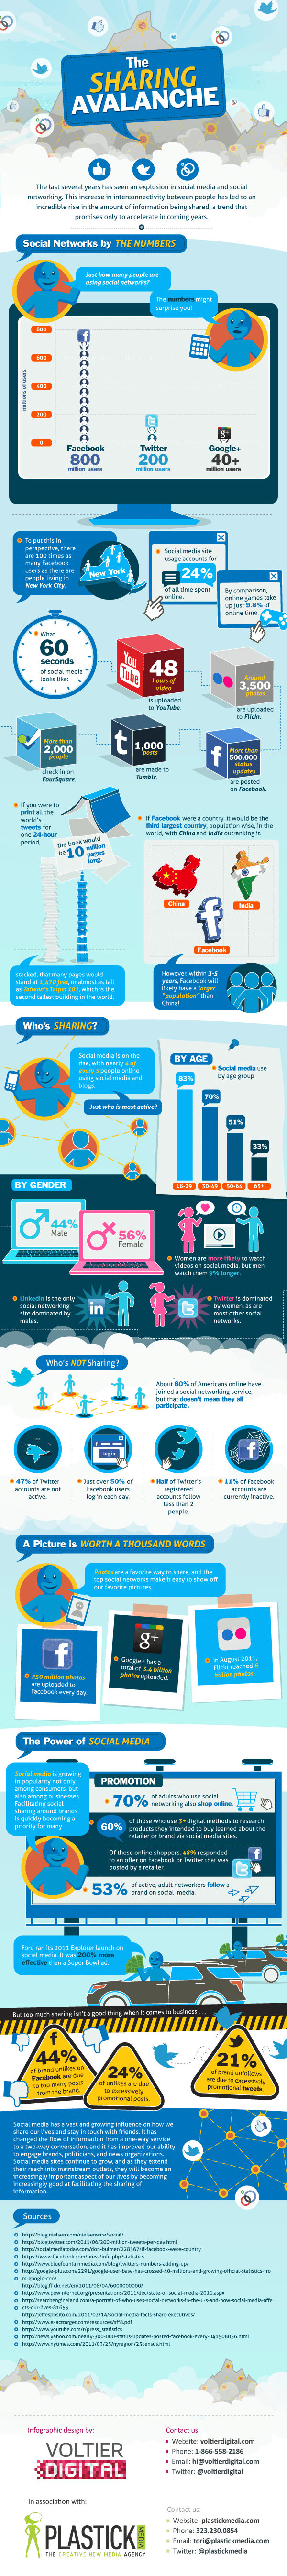 Social sharing infographic